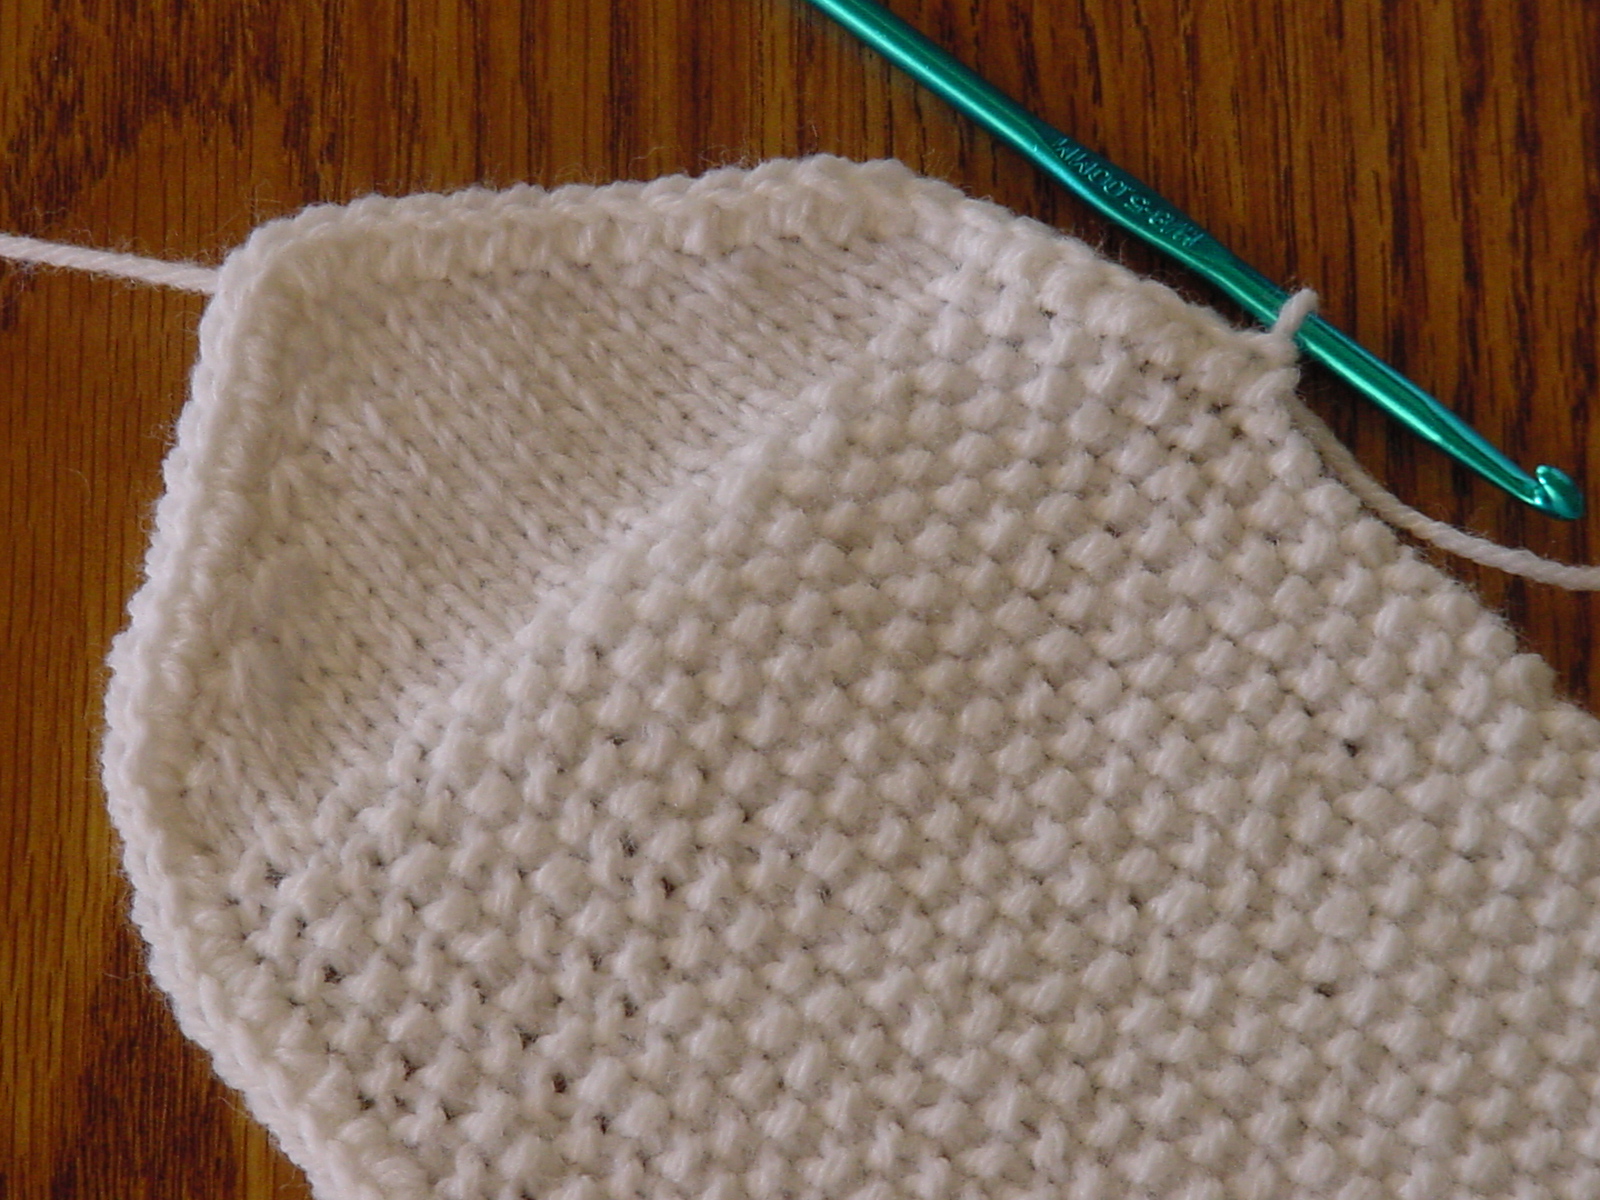 Crocheting around the edge of the knitted gift pouch